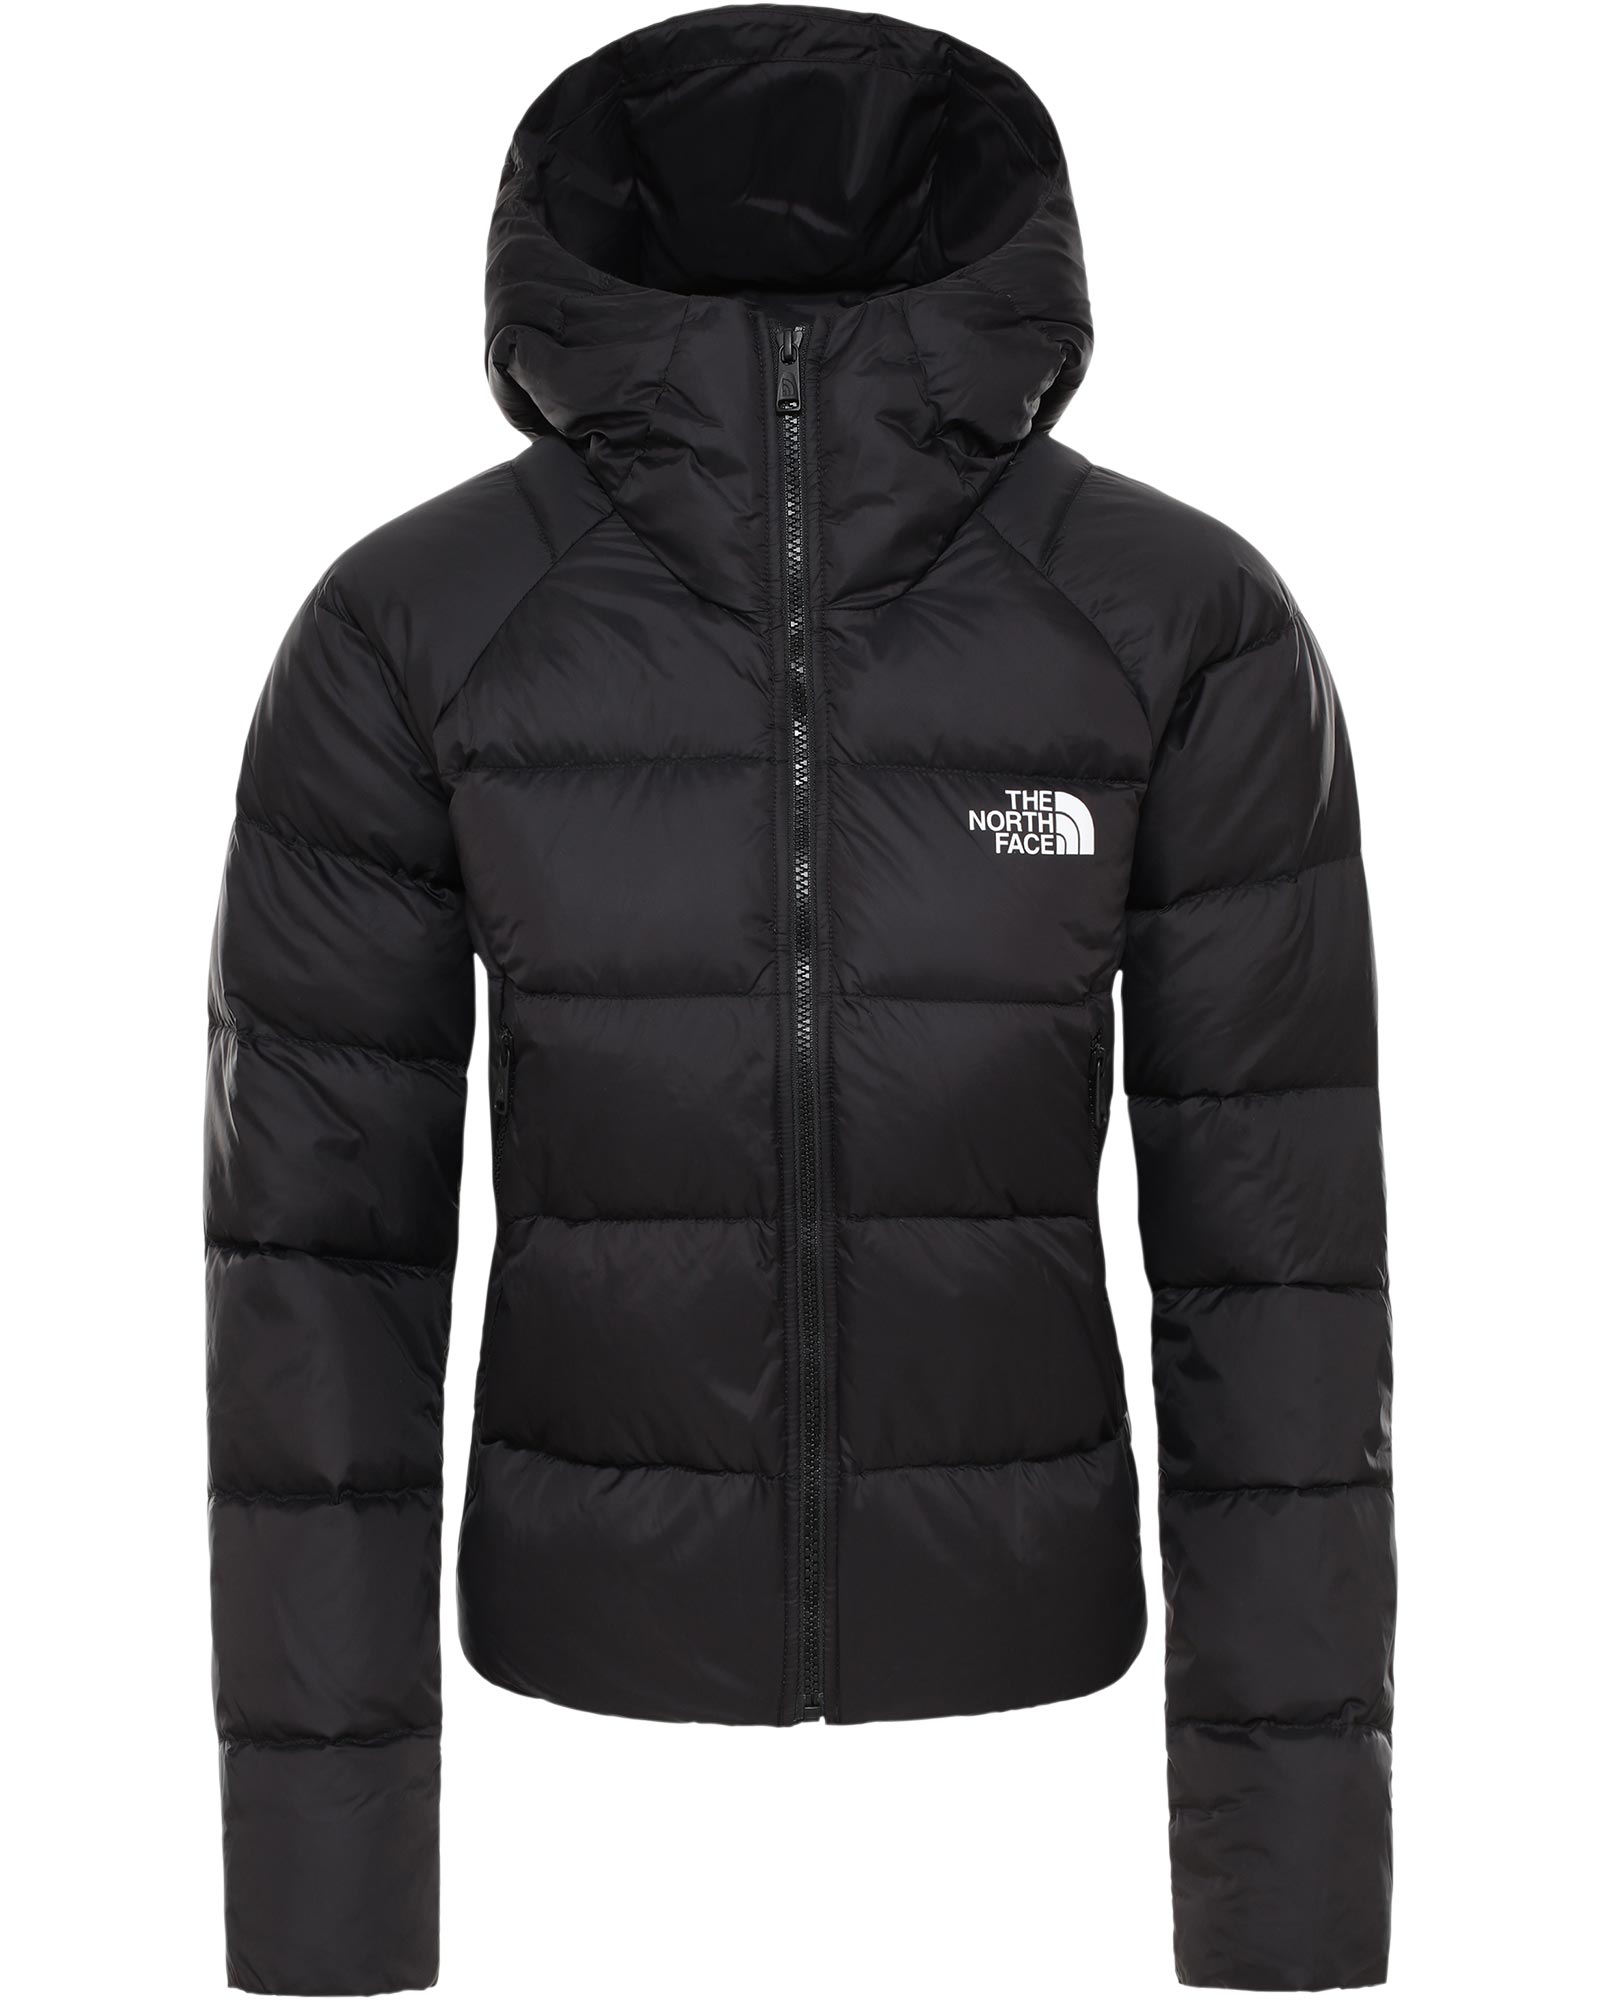 Product image of The North Face Hyalite Women's Down Hoodie